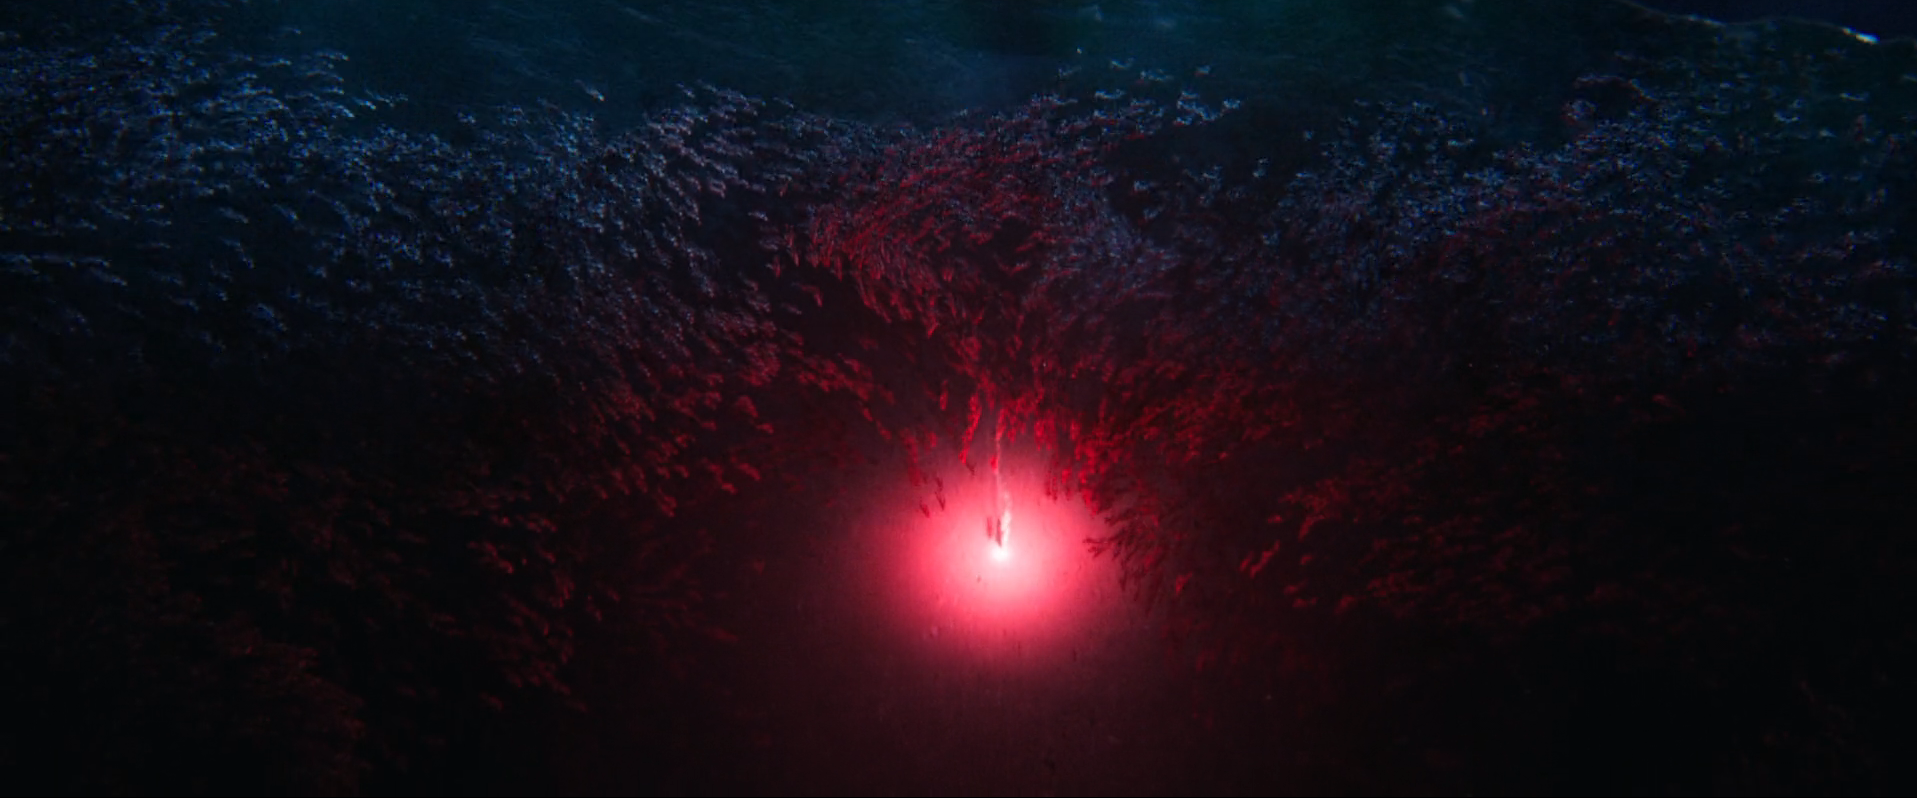 Beautiful shots from a good movie. Who can guess the movie? - My, Movies, guess, A fish, Light, Red light, Ocean